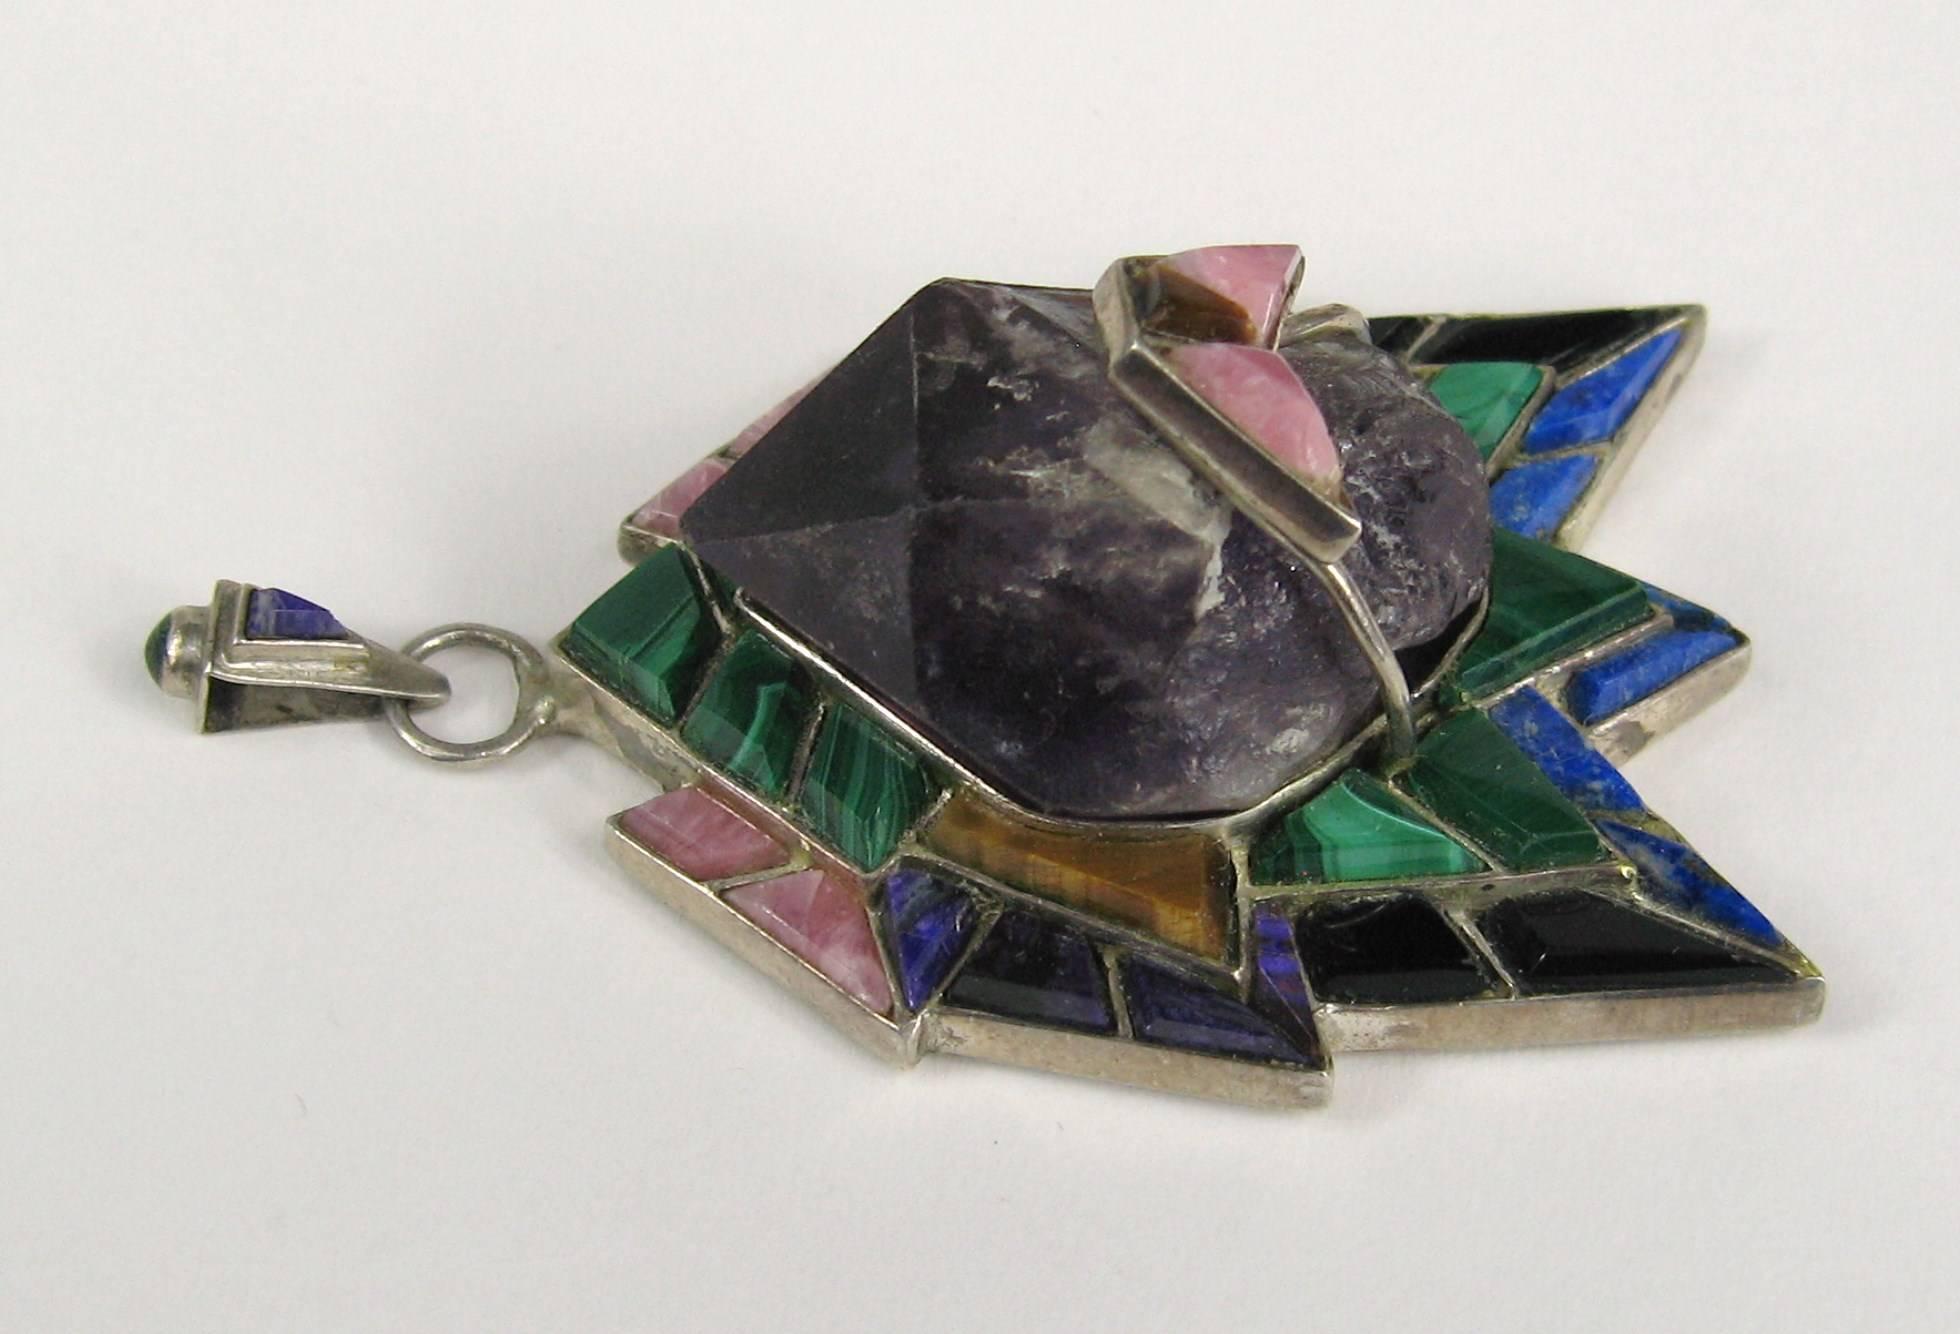 This is a large Hand Crafted Multi-Gemstone Pendant set in sterling silver. There is a large Amethyst Piece in the center surrounded by Malachite, Tigers Eye, Rose Quartz, Onyx, and Lapis. Bale has a cabochon malachite and a bezel set Amethyst in